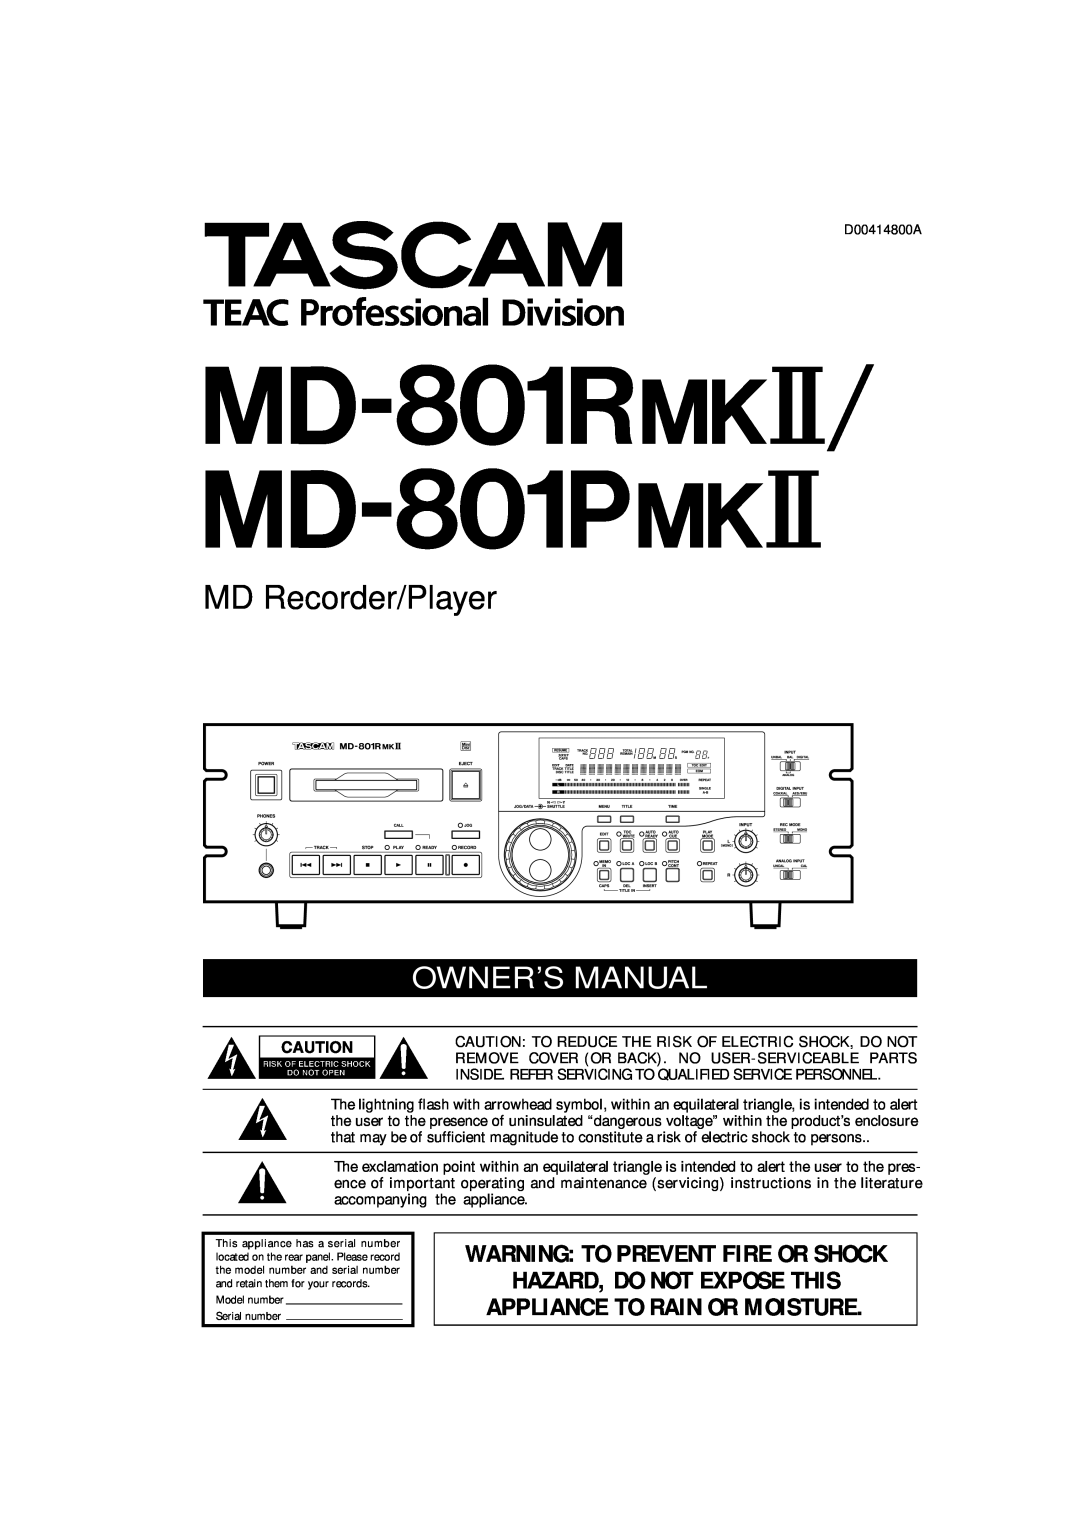 Tascam MD-801RMKII owner manual MD-801R@#/ MD-801P@#, MD Recorder/Player, Hazard, Do Not Expose This 